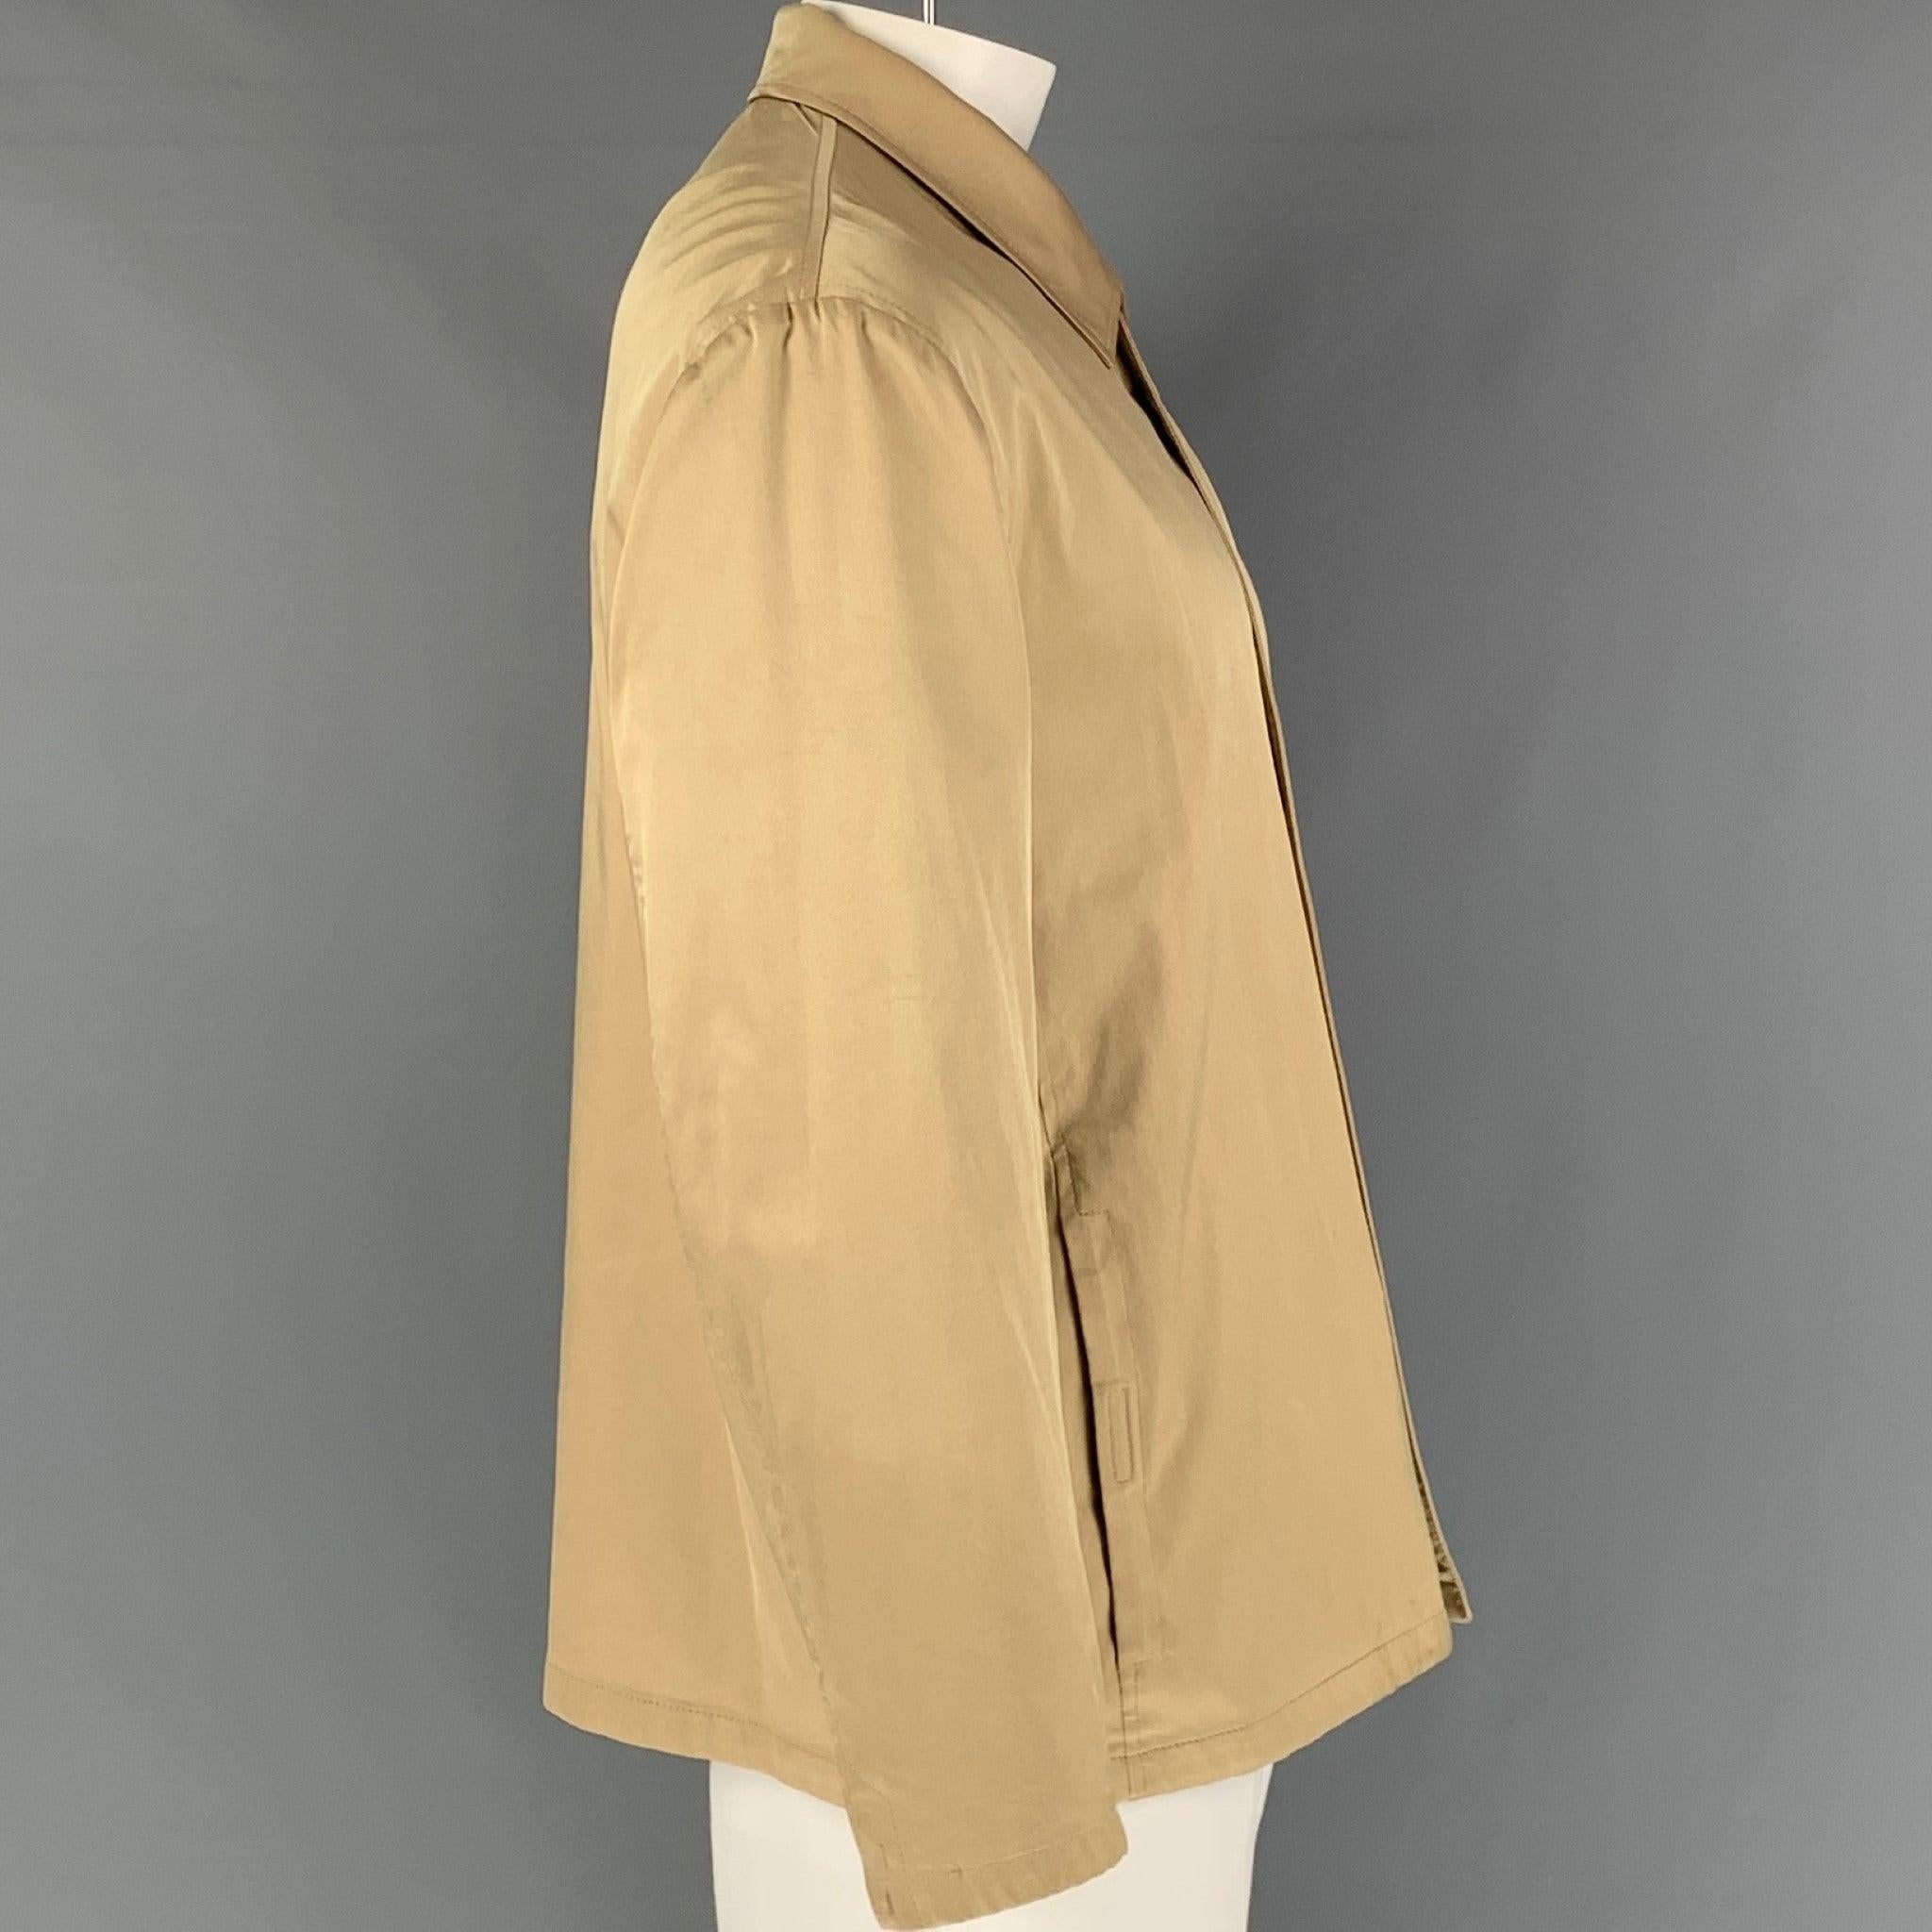 PRADA coat comes in a beige silk blend fabric featuring slit frontal pockets and zip up closure. Made in Italy.Very Good Pre-Owned Condition. Minor marks at collar and sleeves. 

Marked:   XL 

Measurements: 
 
Shoulder: 21 inches Chest: 52 inches